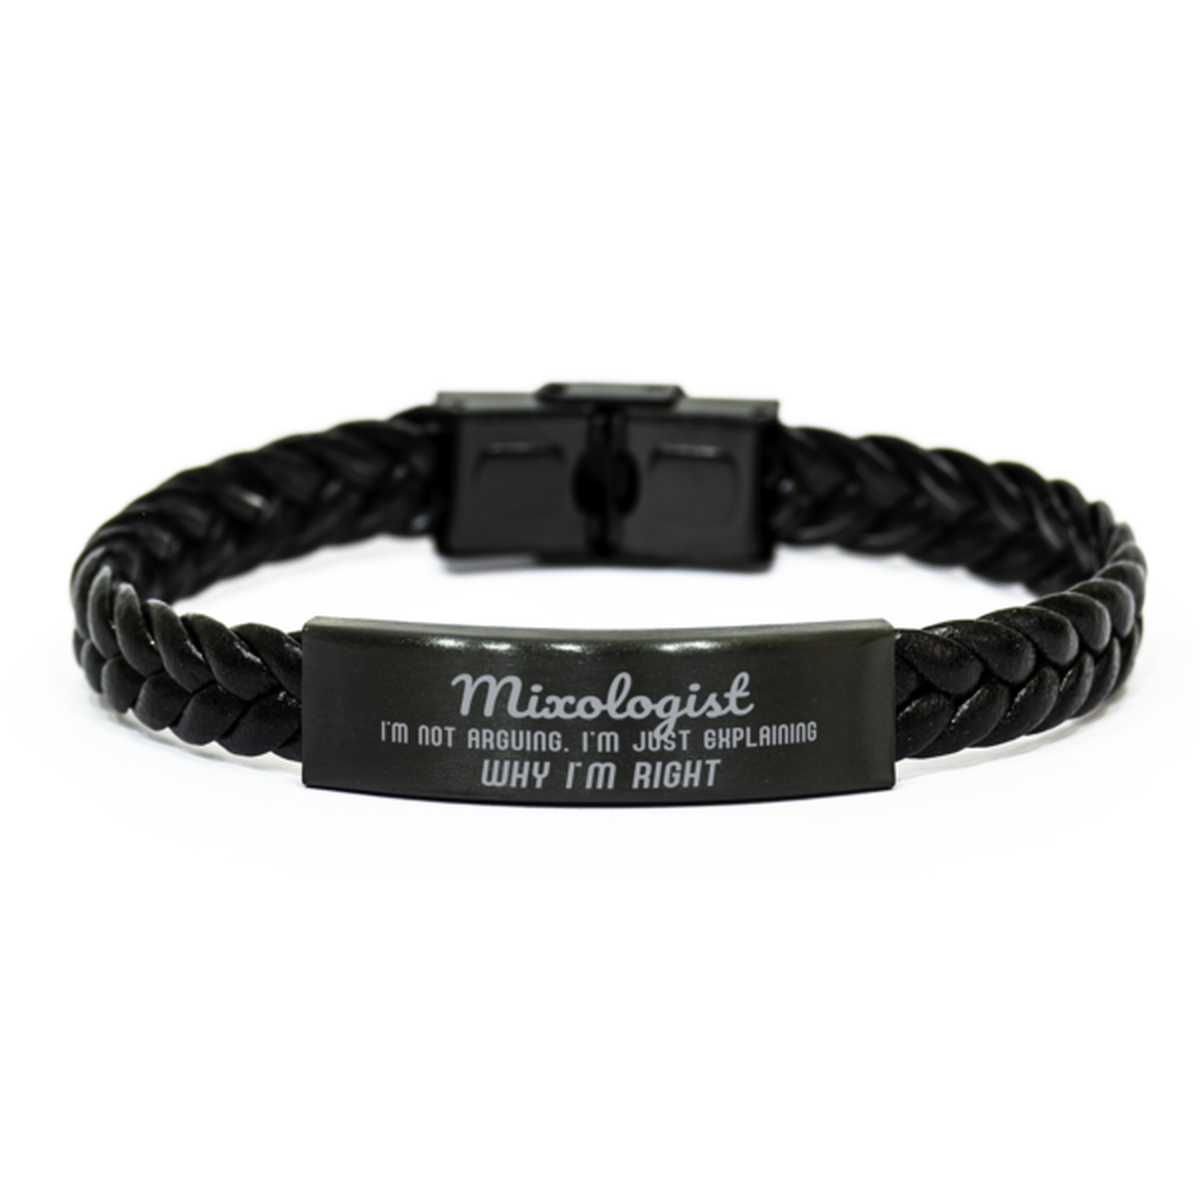 Mixologist I'm not Arguing. I'm Just Explaining Why I'm RIGHT Braided Leather Bracelet, Graduation Birthday Christmas Mixologist Gifts For Mixologist Funny Saying Quote Present for Men Women Coworker